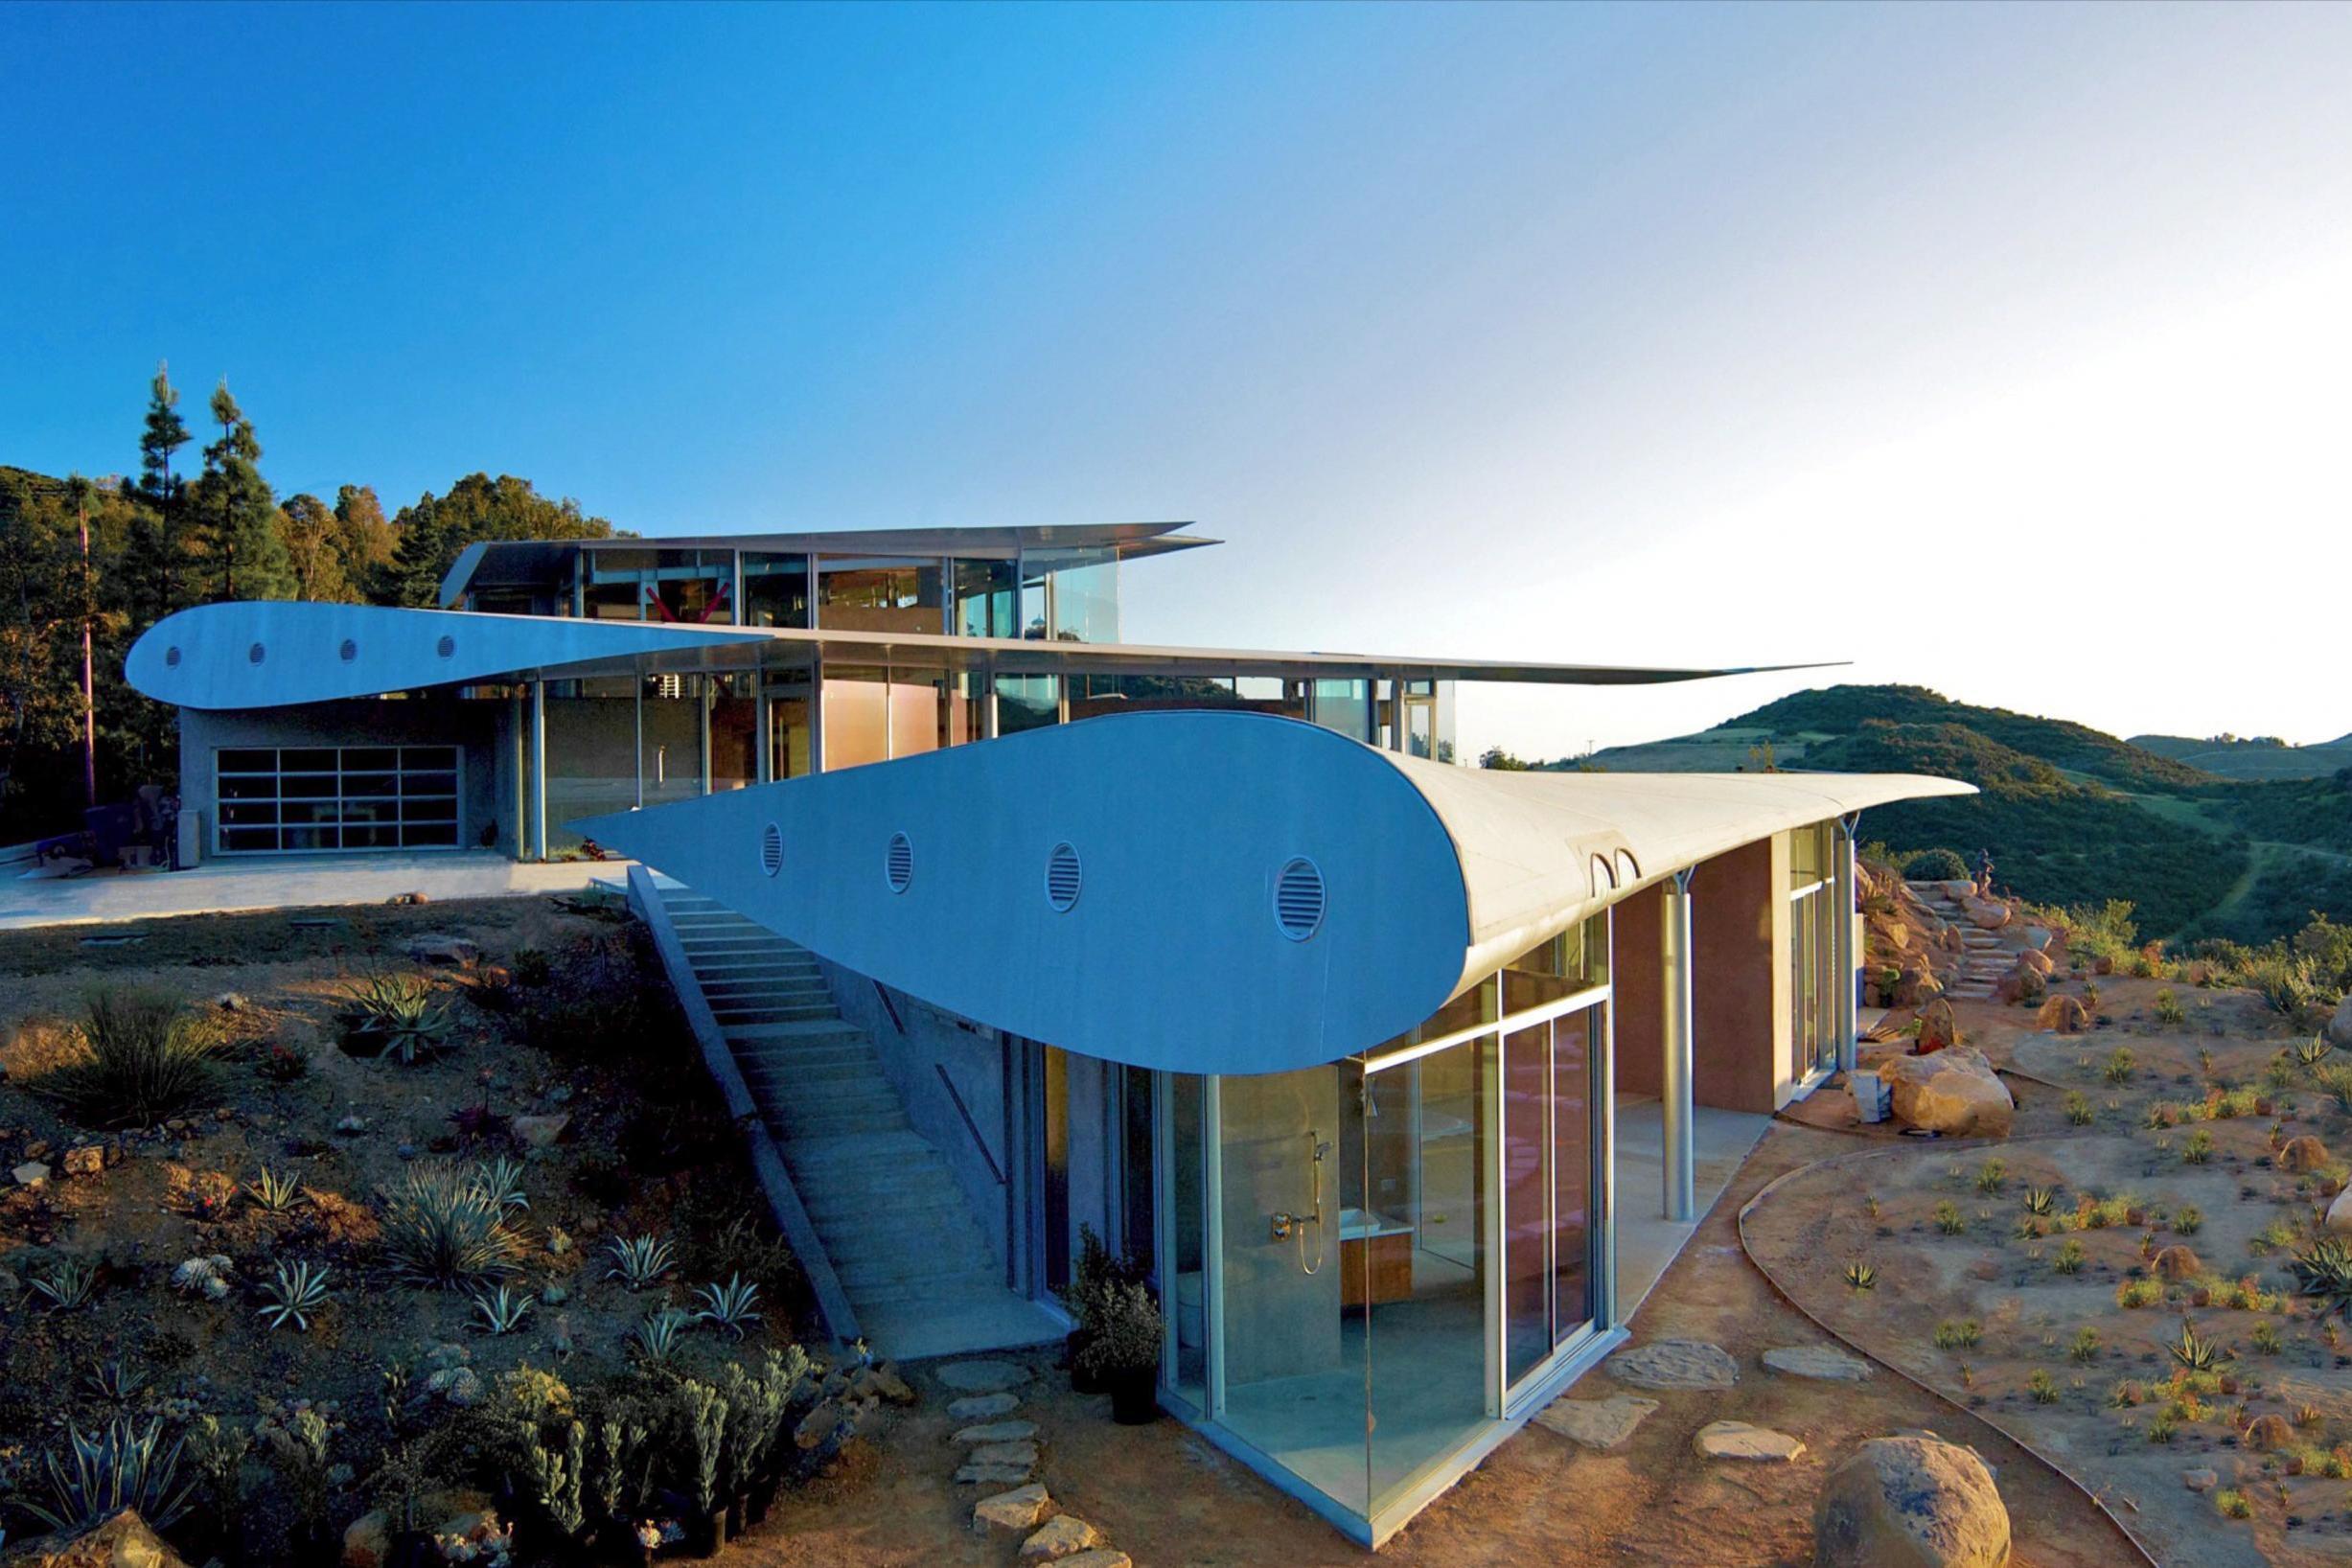 Netflix Shows You “The Most Extraordinary Homes” Around The World 7